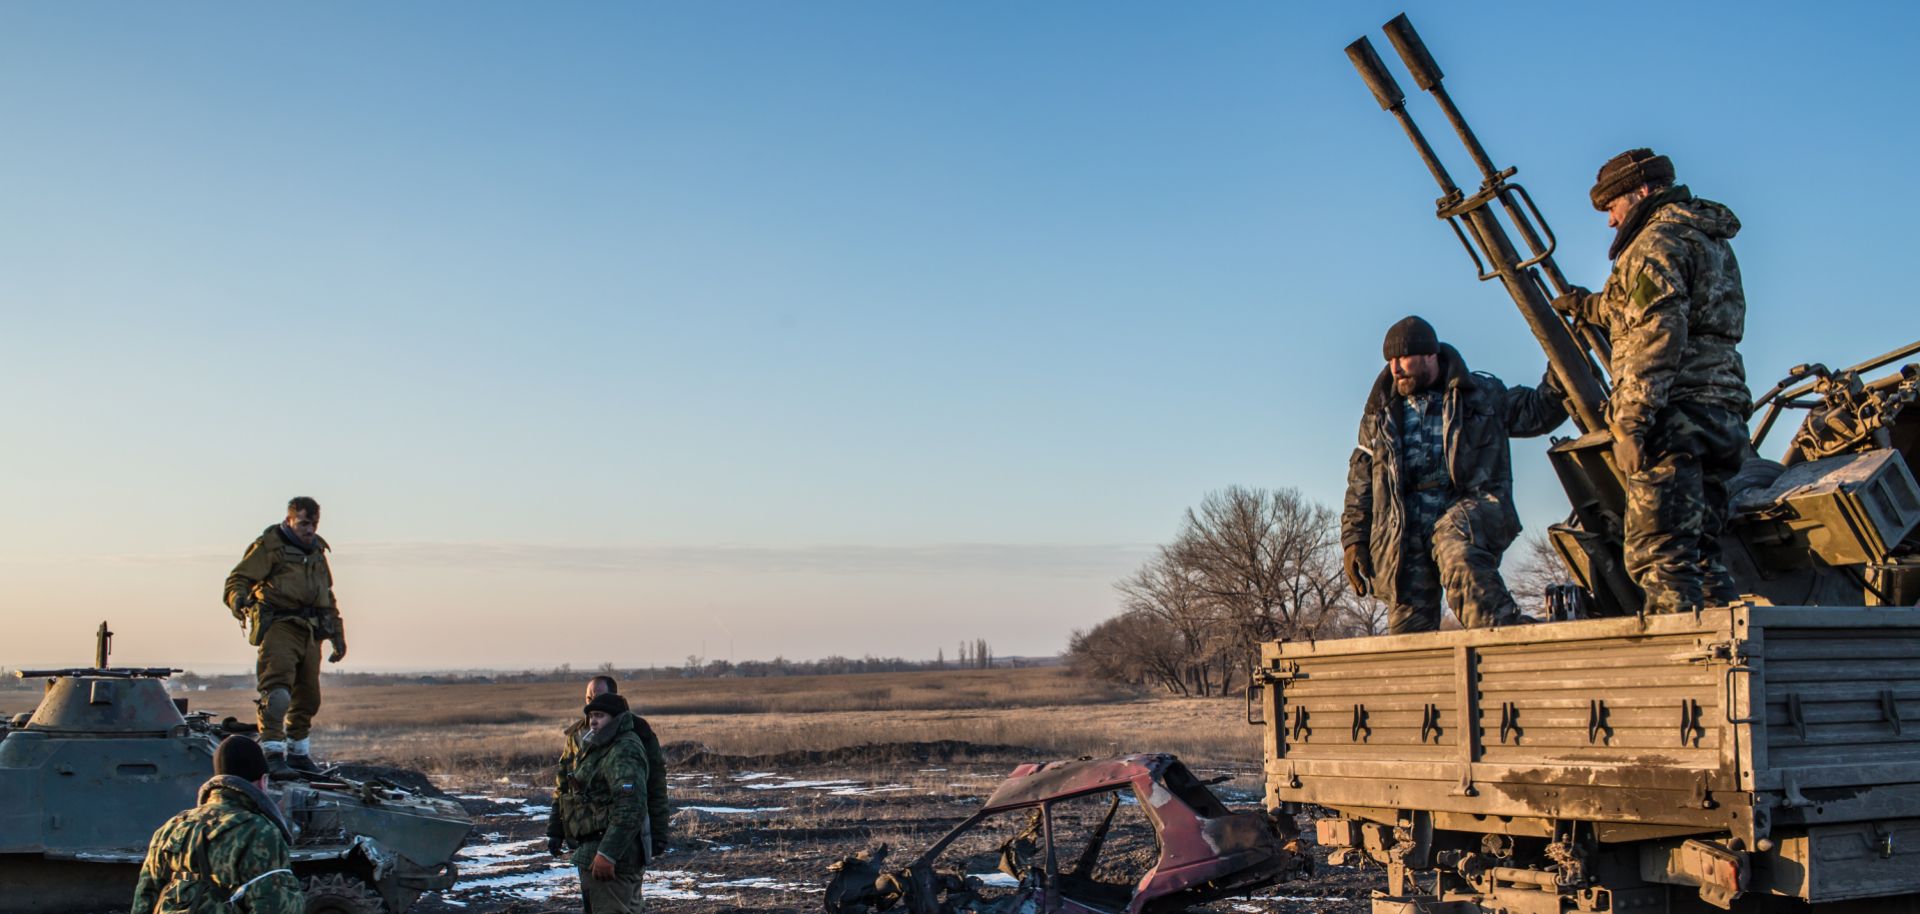 A picture shows a group of pro-Russia Cossack rebel fighters organize equipment, some of which was captured from the Ukrainian Army, on Feb. 20, 2015 in Debaltseve, Ukraine. 